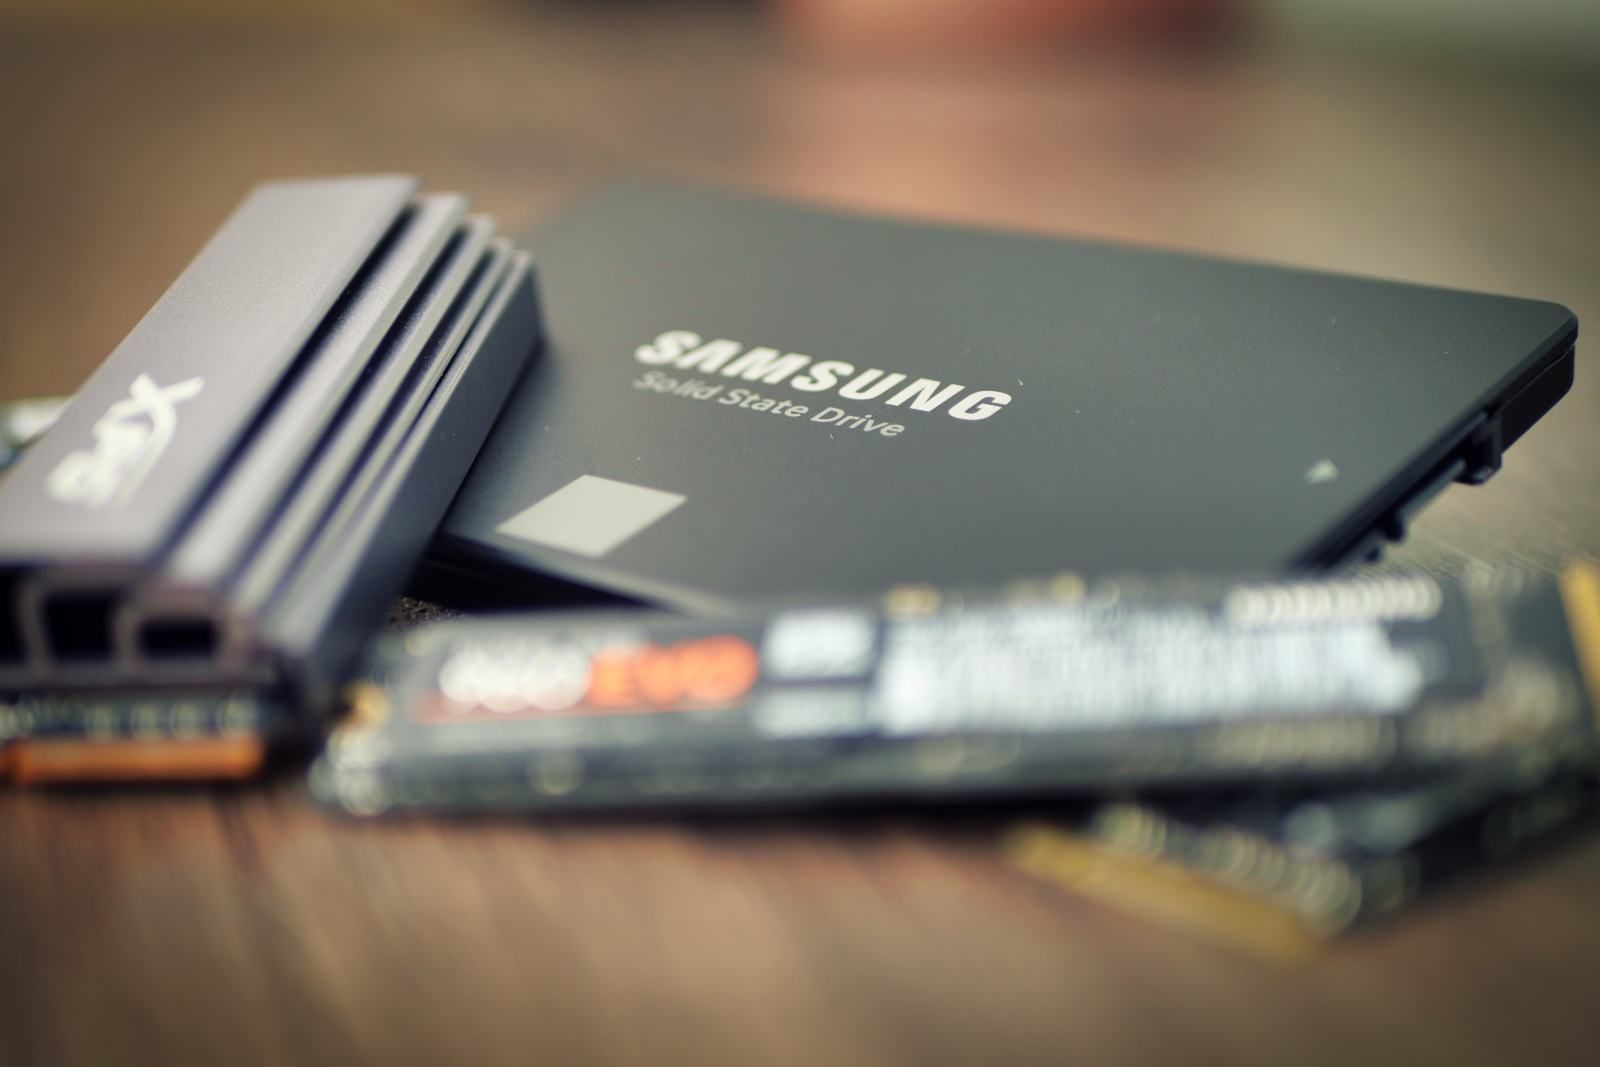 How to install an SSD in gaming PC